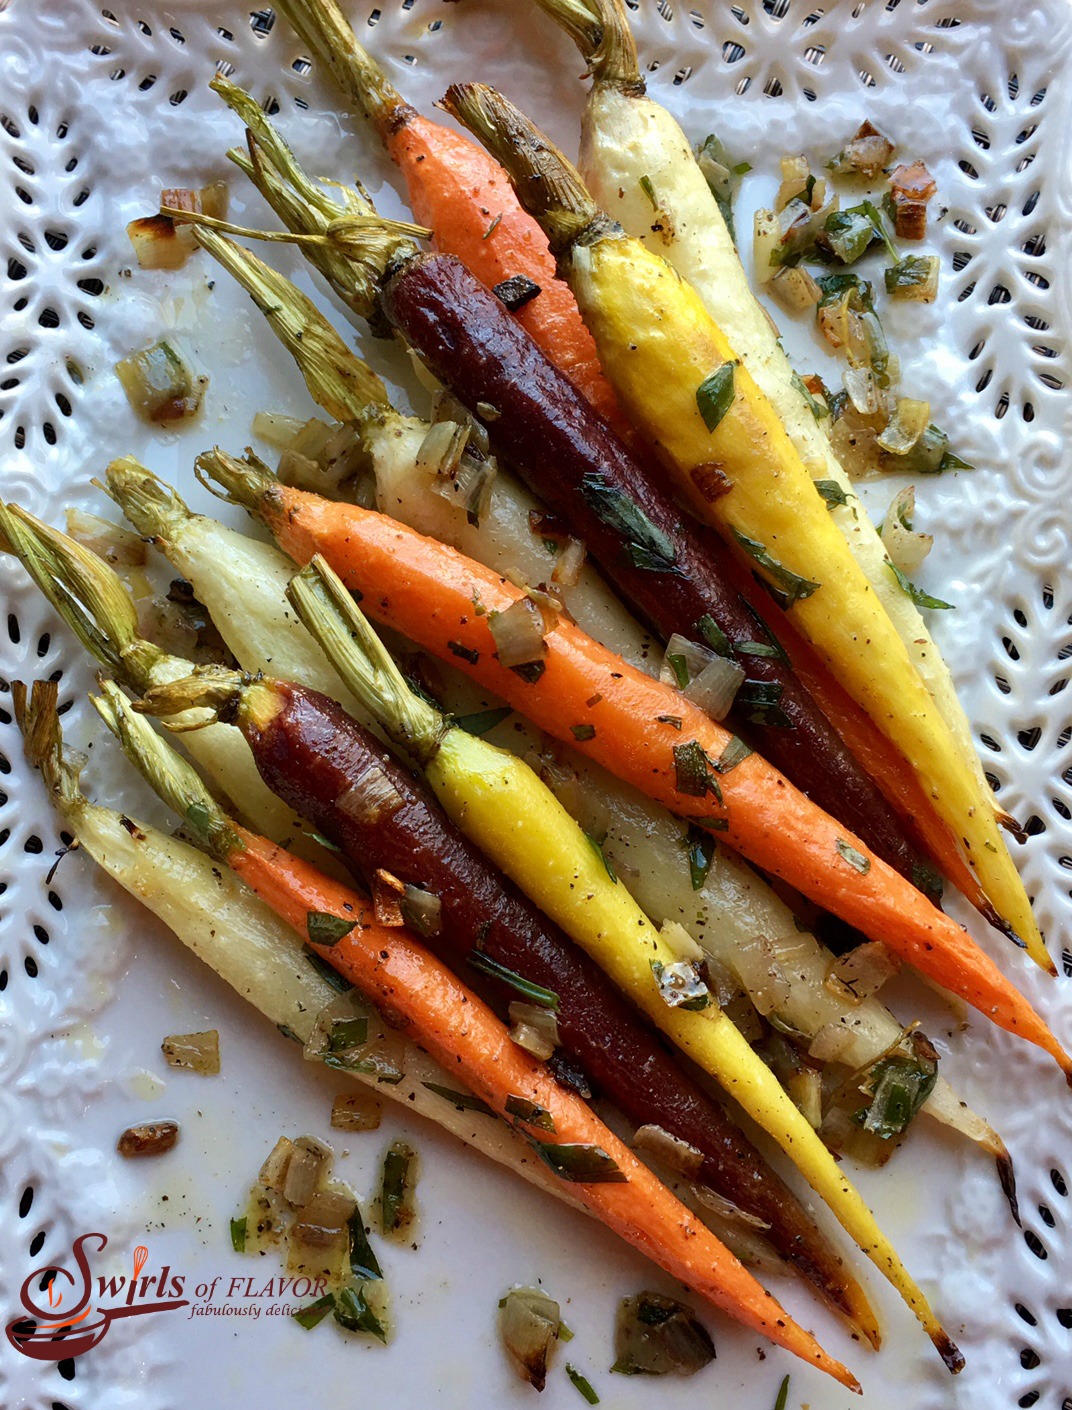 Roasted TriColored Tarragon Carrots Swirls of Flavor